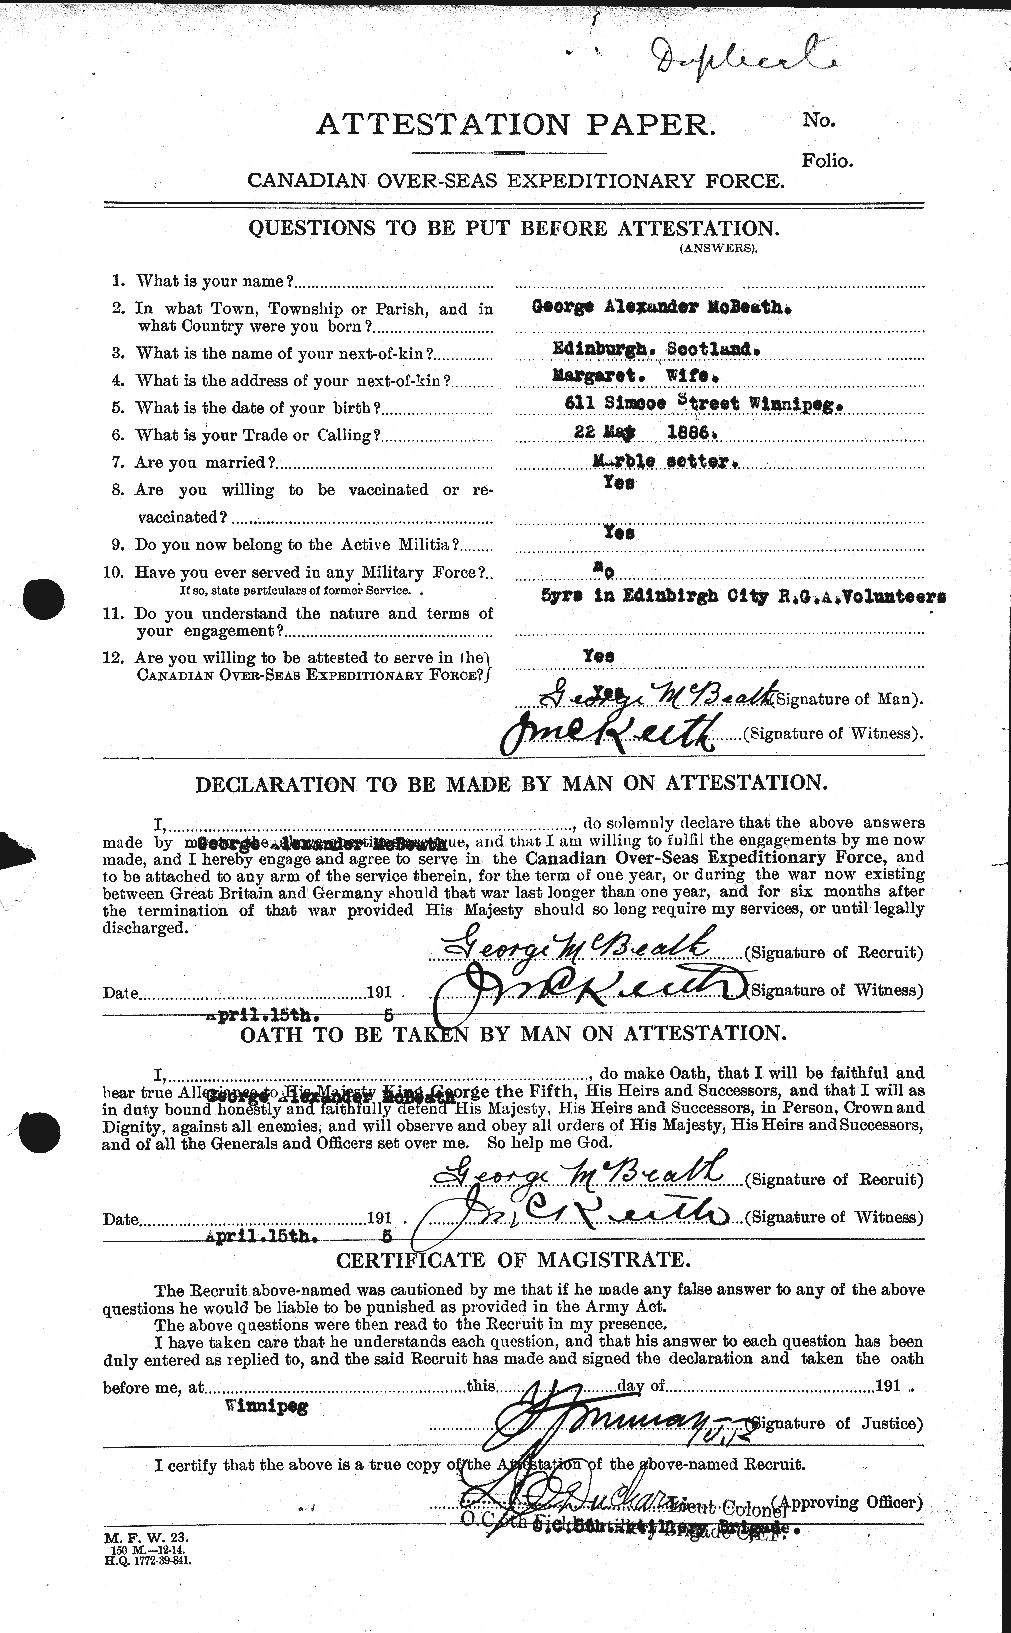 Personnel Records of the First World War - CEF 132386a